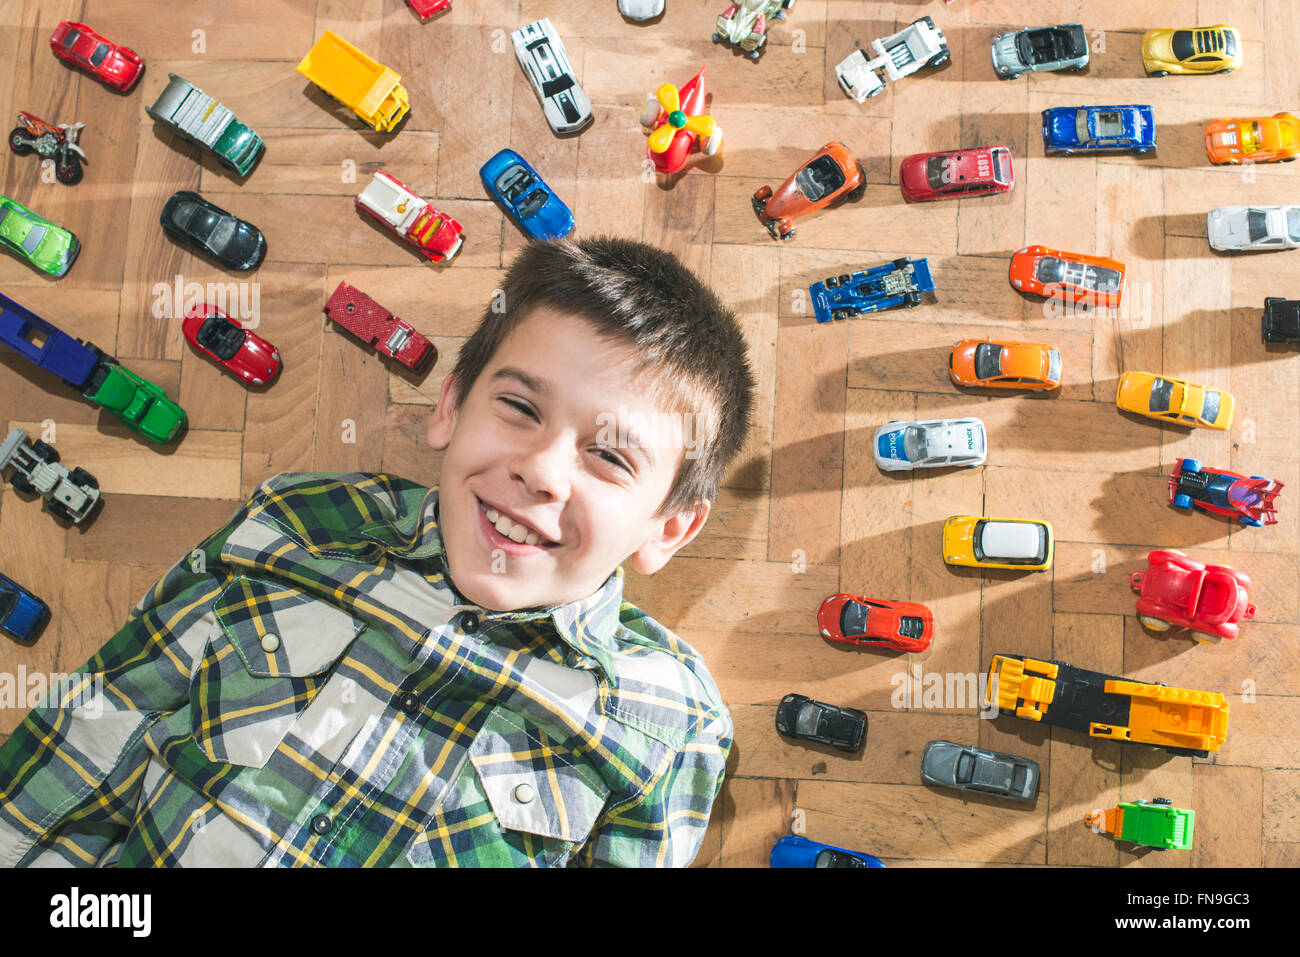 Boy lying on floor surrounded by toy cars Stock Photo